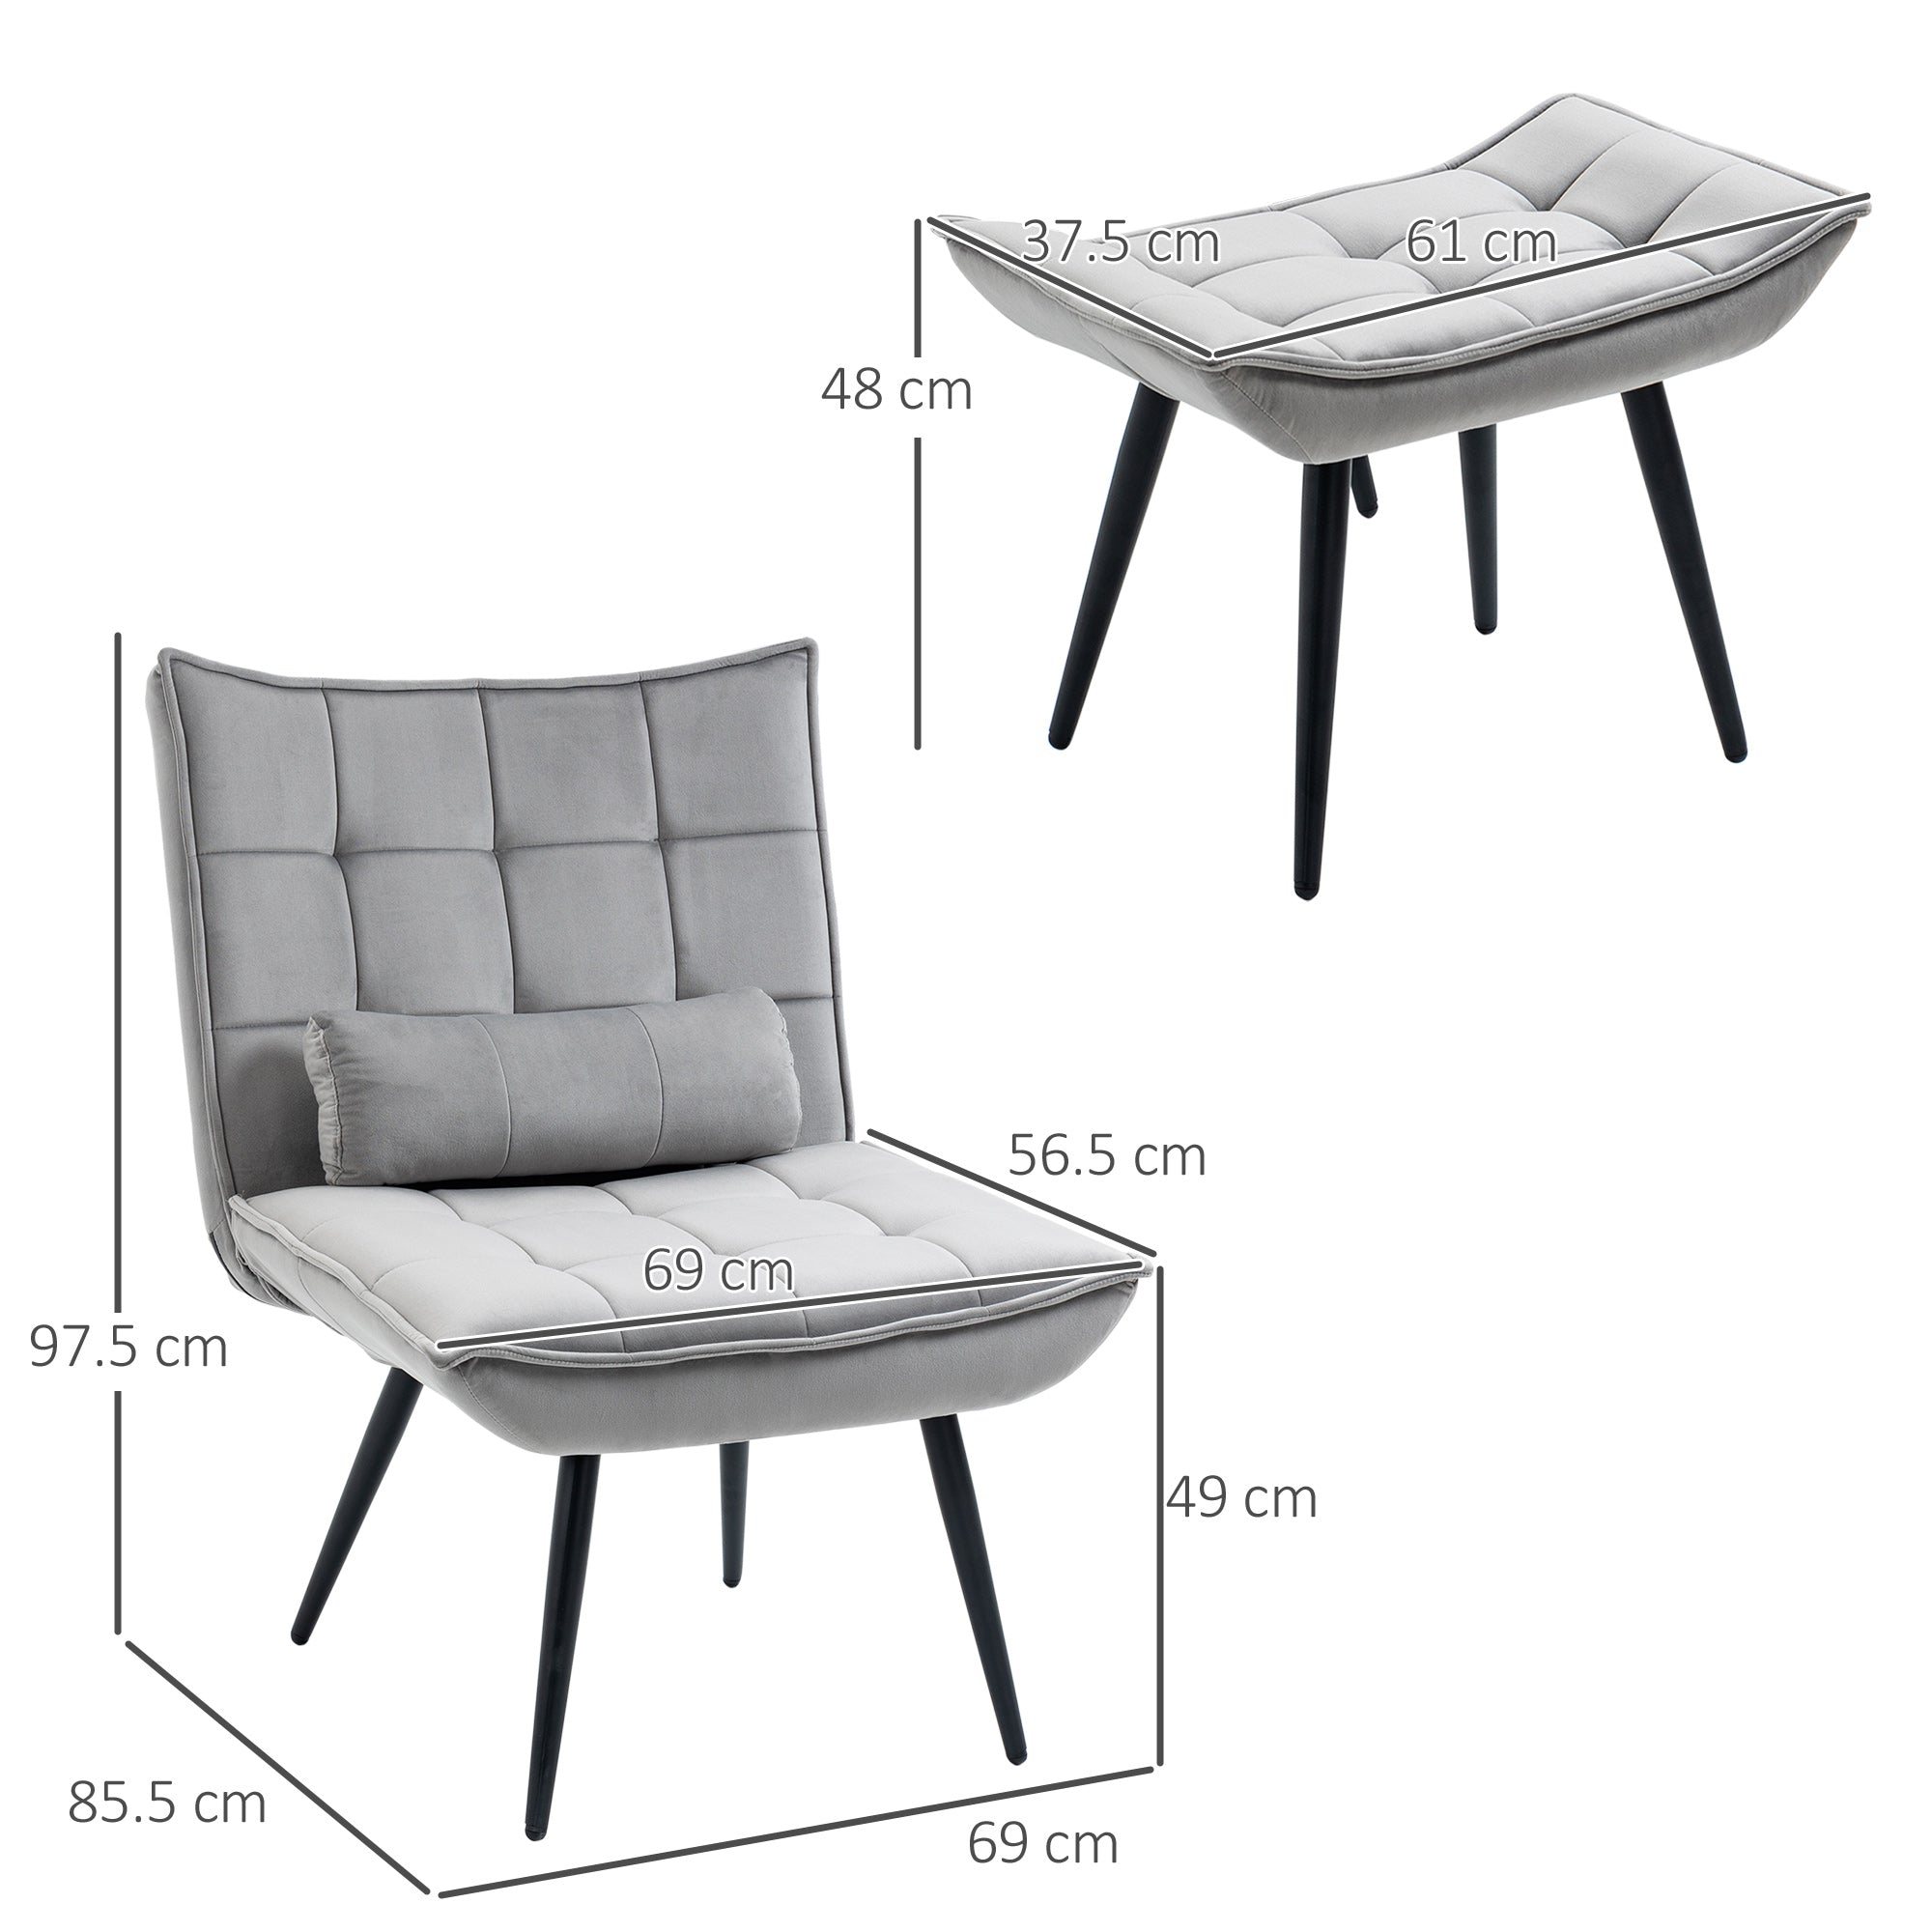 Armless Accent Chair w/ Footstool Set, Modern Tufted Upholstered Lounge Chair w/ Pillow, Steel Legs, Grey-2